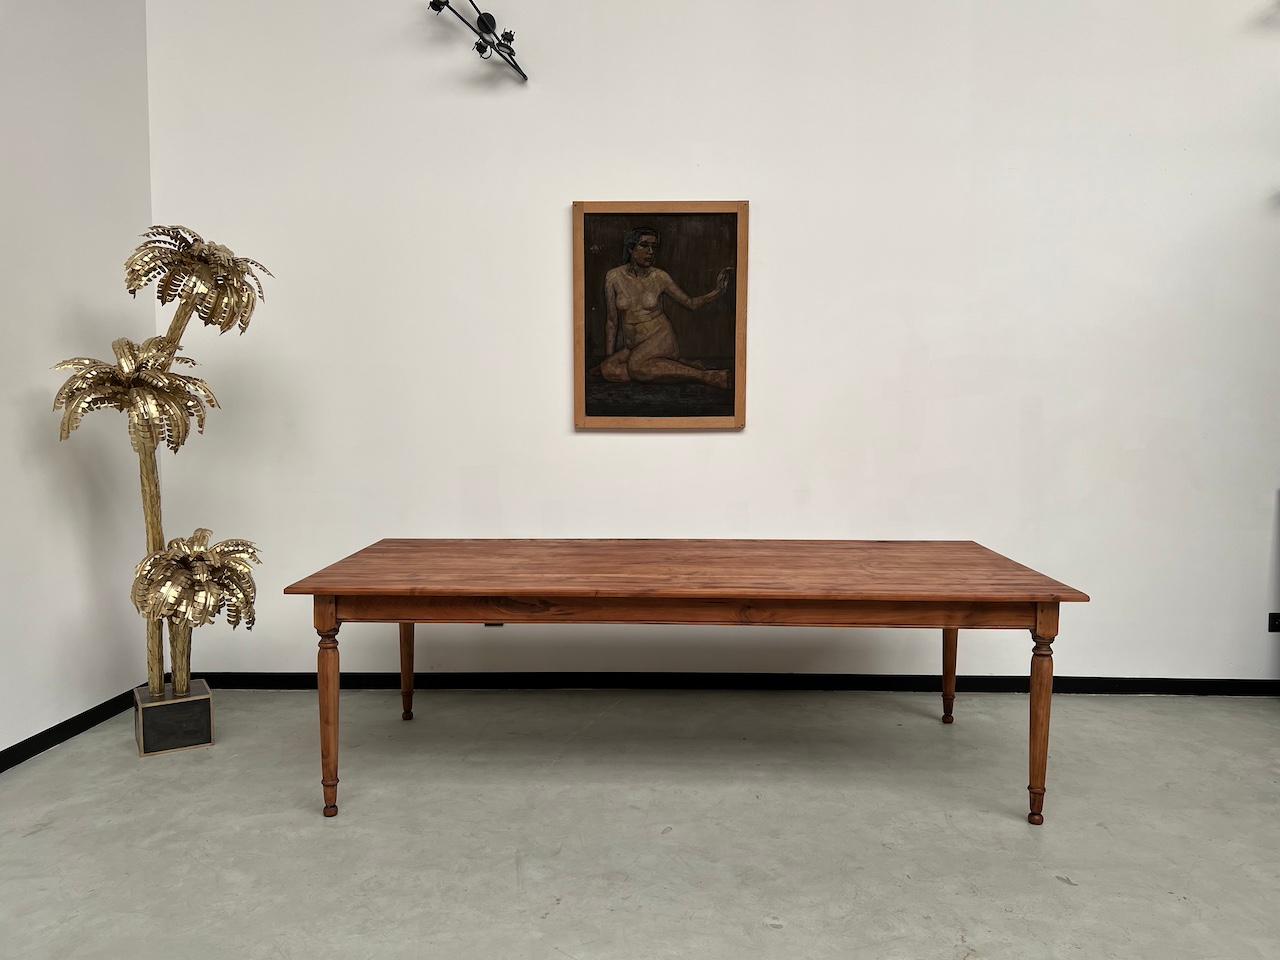 Large farm table in solid cherry wood from the 70s and of great depth, completely restored.
This farm table has generous proportions and a very pretty patina of the wood, the species of cherry (or cherry) having a lot to do with it. With its great